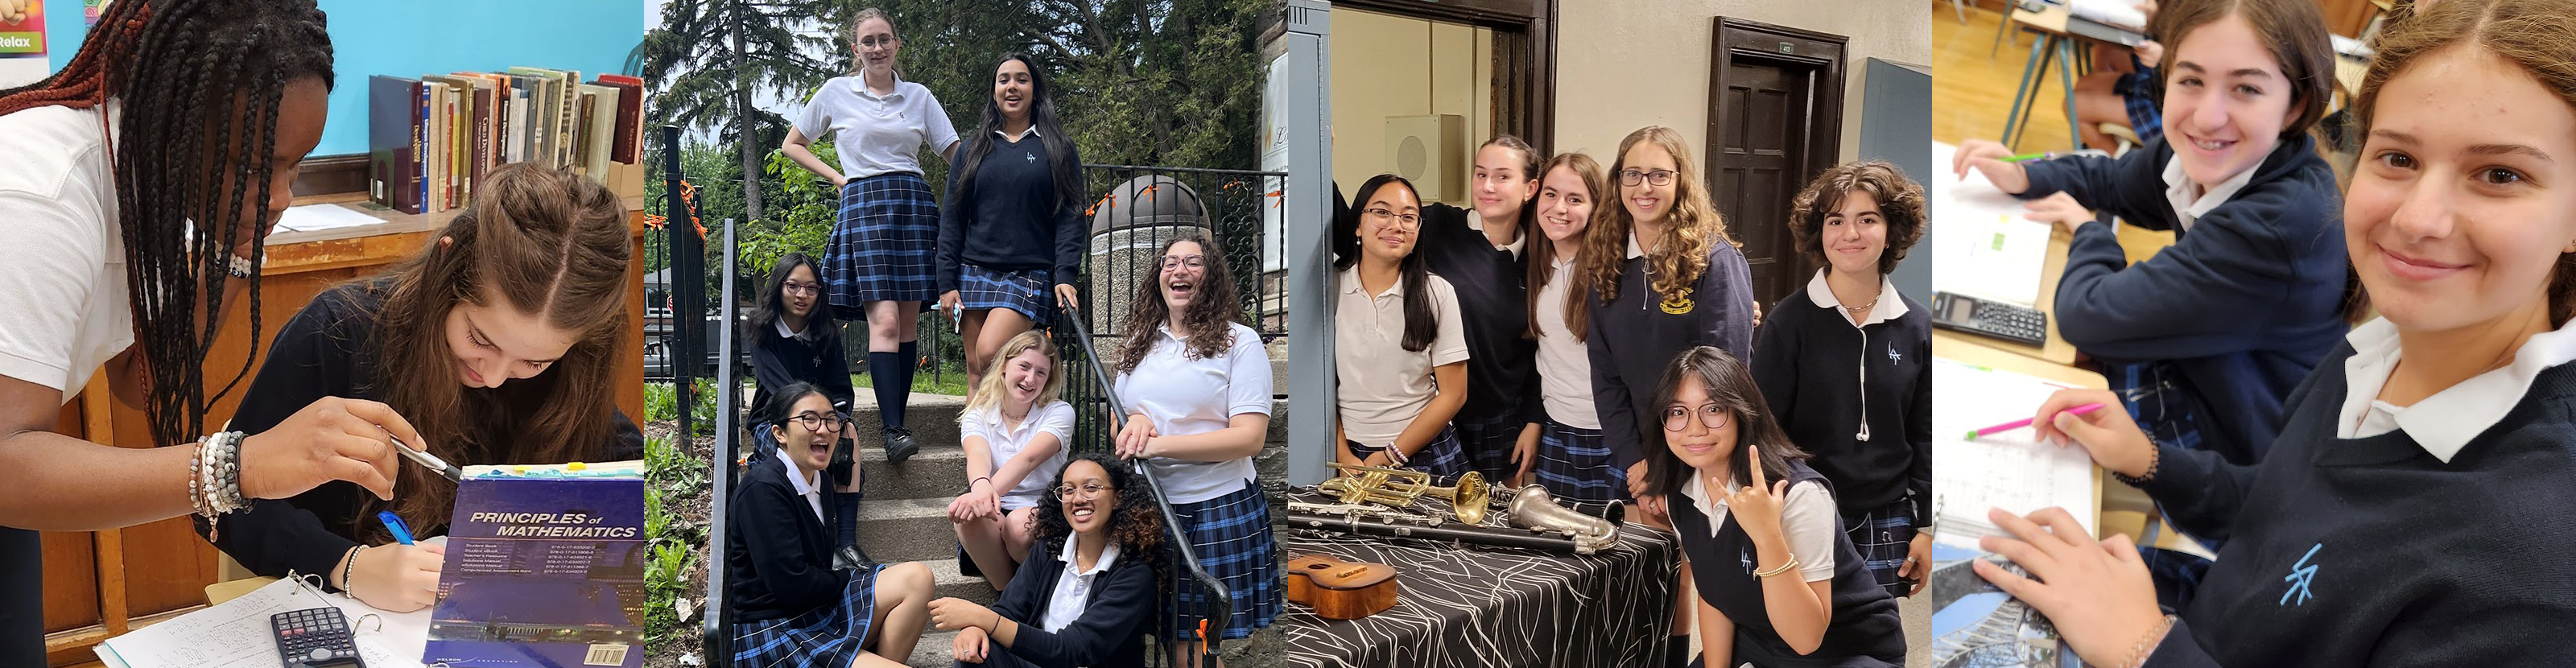 First picture is of one Loretto Abbey student helping another in class. Second picture is of Loretto Abbey students in uniform posing together on the school steps. Third picture is of Loretto Abbey students posing together in the school hallway next to musical instruments. Fourth picture is of Loretto Abbey students in class.